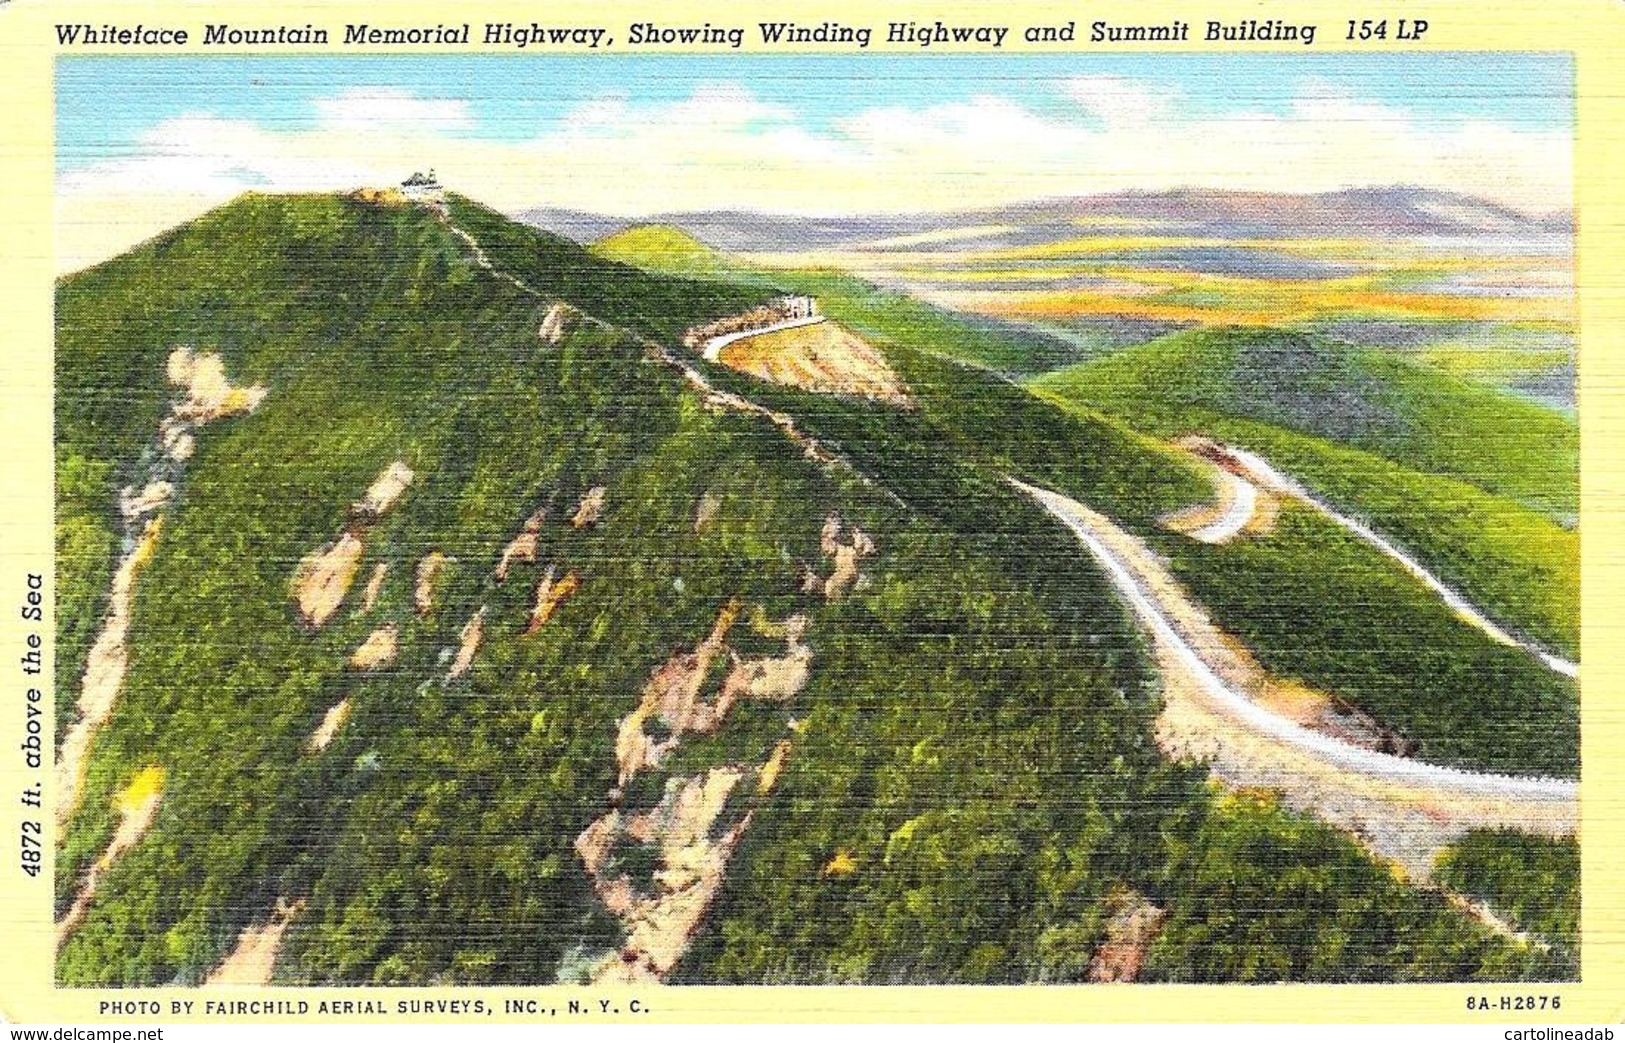 [DC12054] CPA - UNITED STATES - WHITEFACE MOUNTAIN MEMORIAL HIGHWAY SHOWING WINDING HIGHWAY AND SUMMIT BUILDING - NV - Adirondack